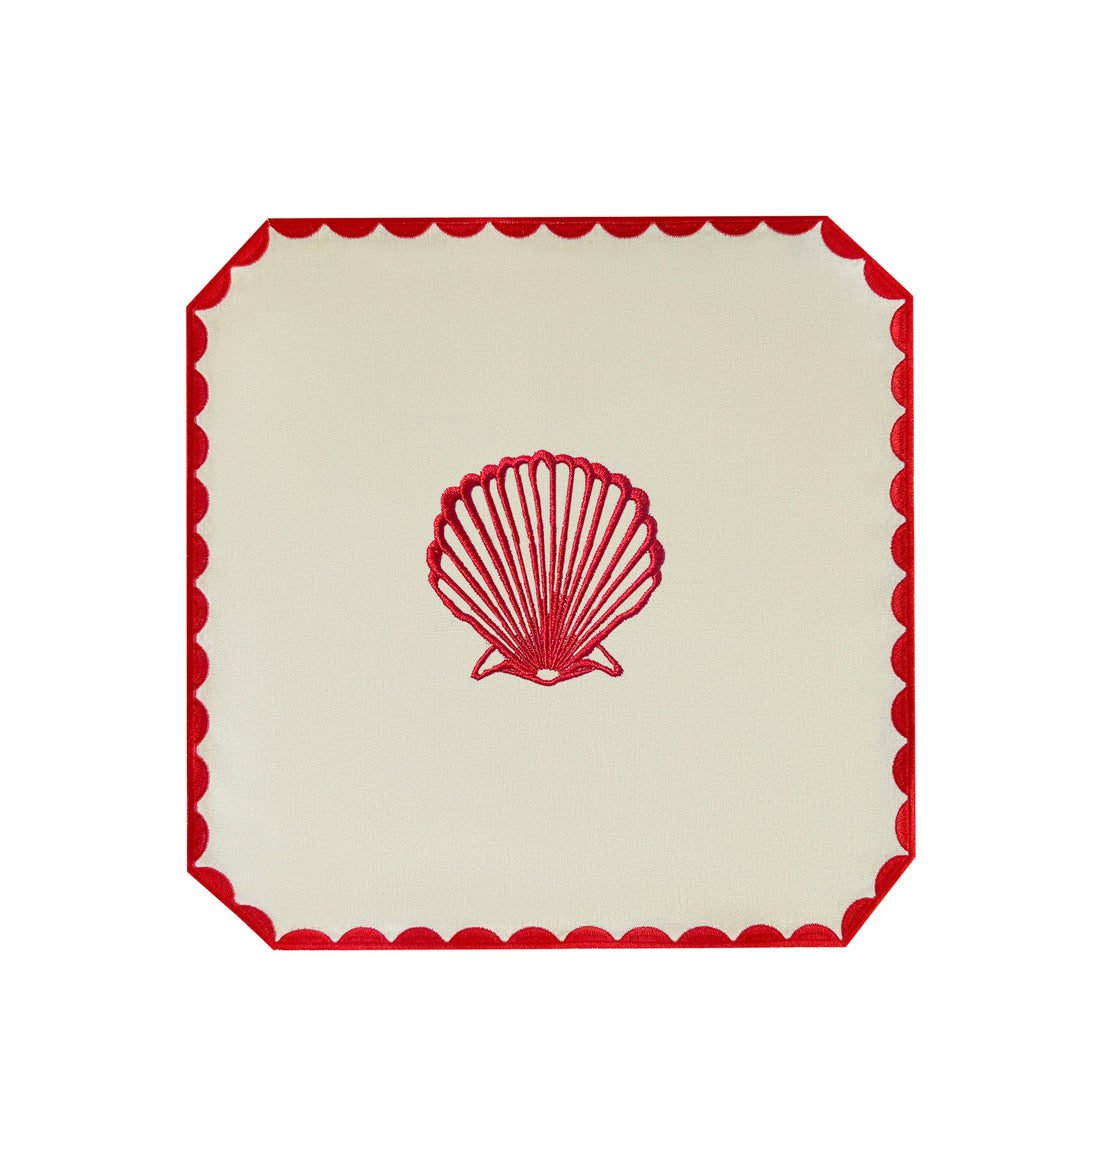 Embroidered Sea Shells & Coral Placemats | Set of 4